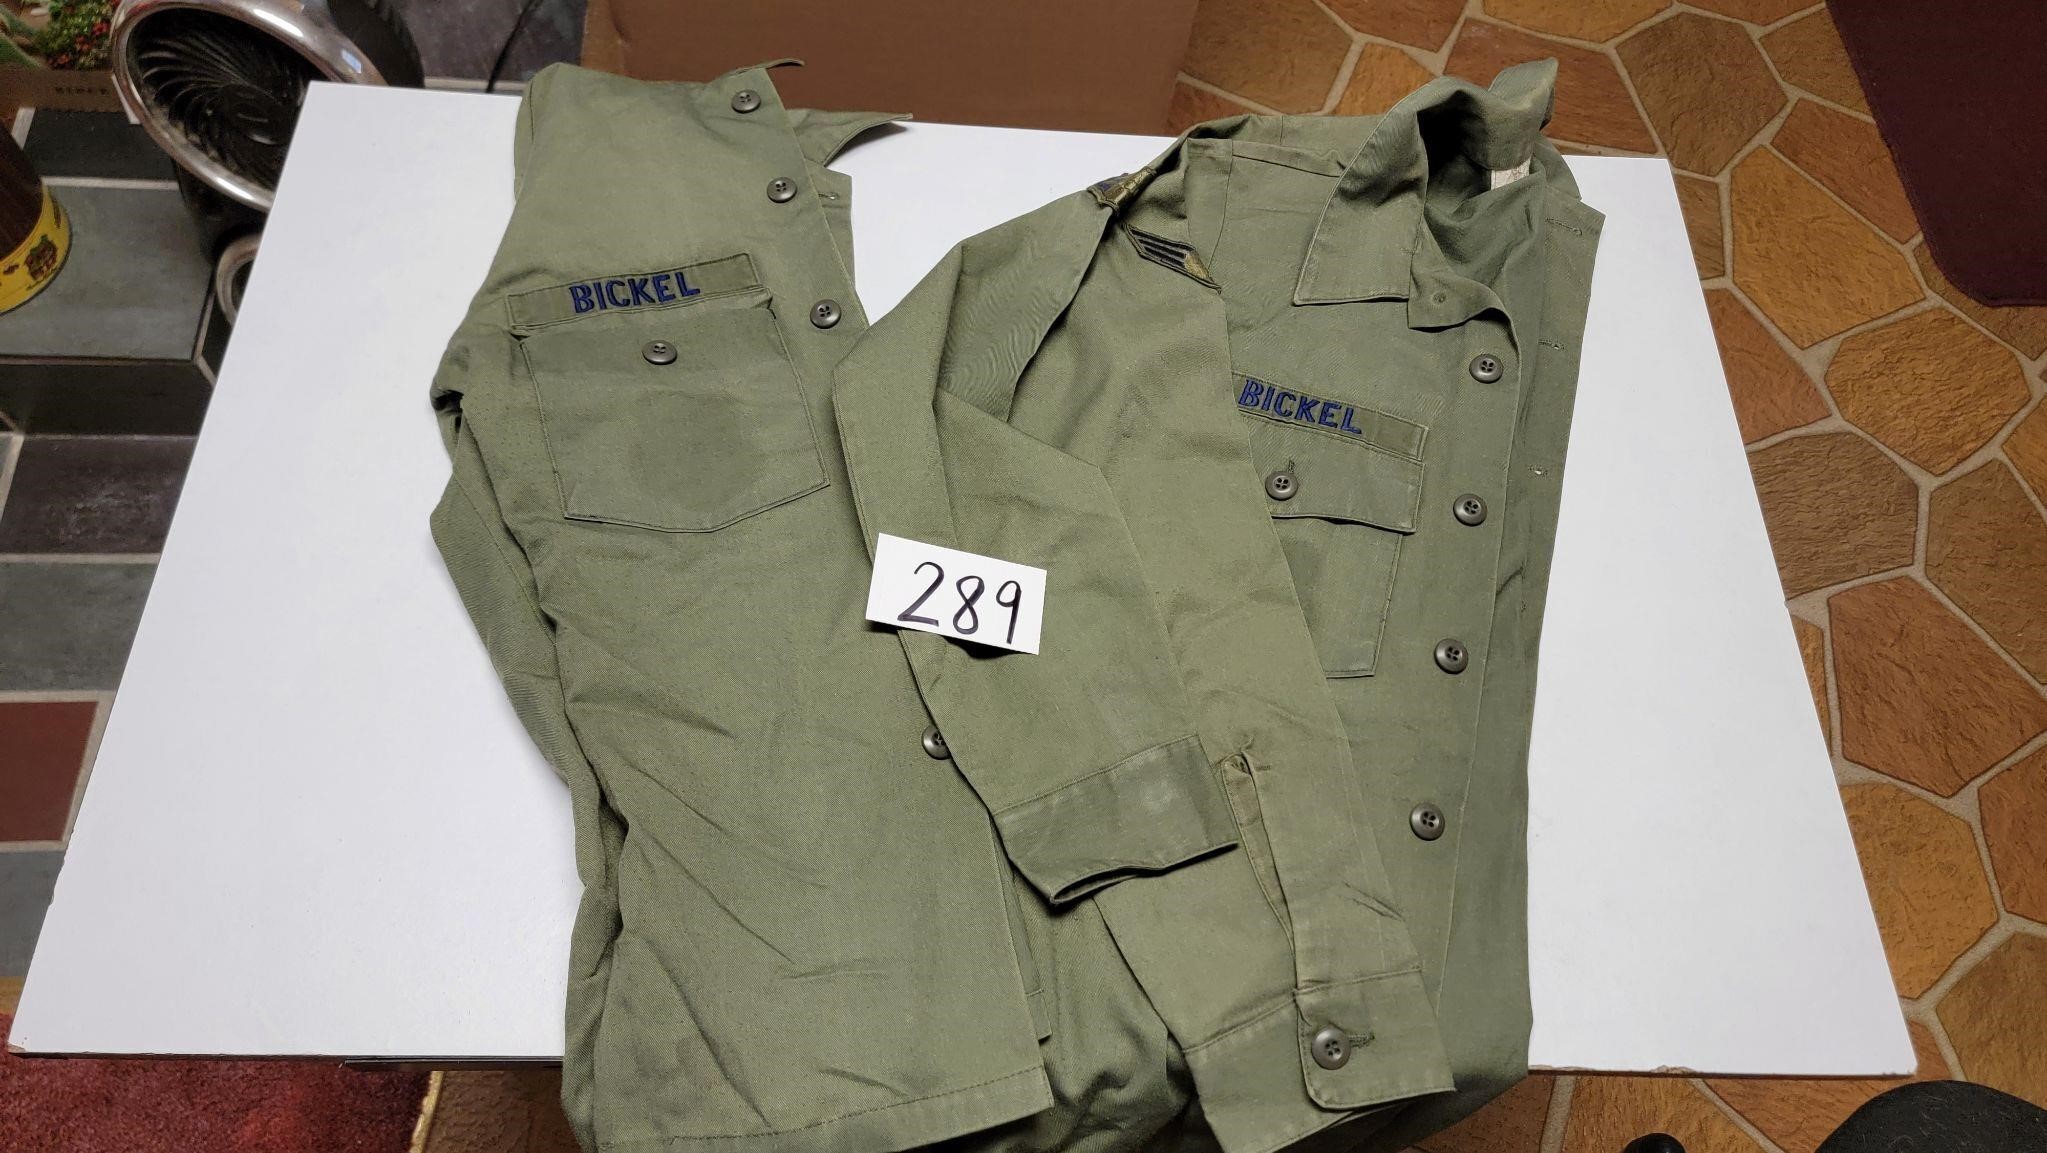 Two Air Force Fatigues